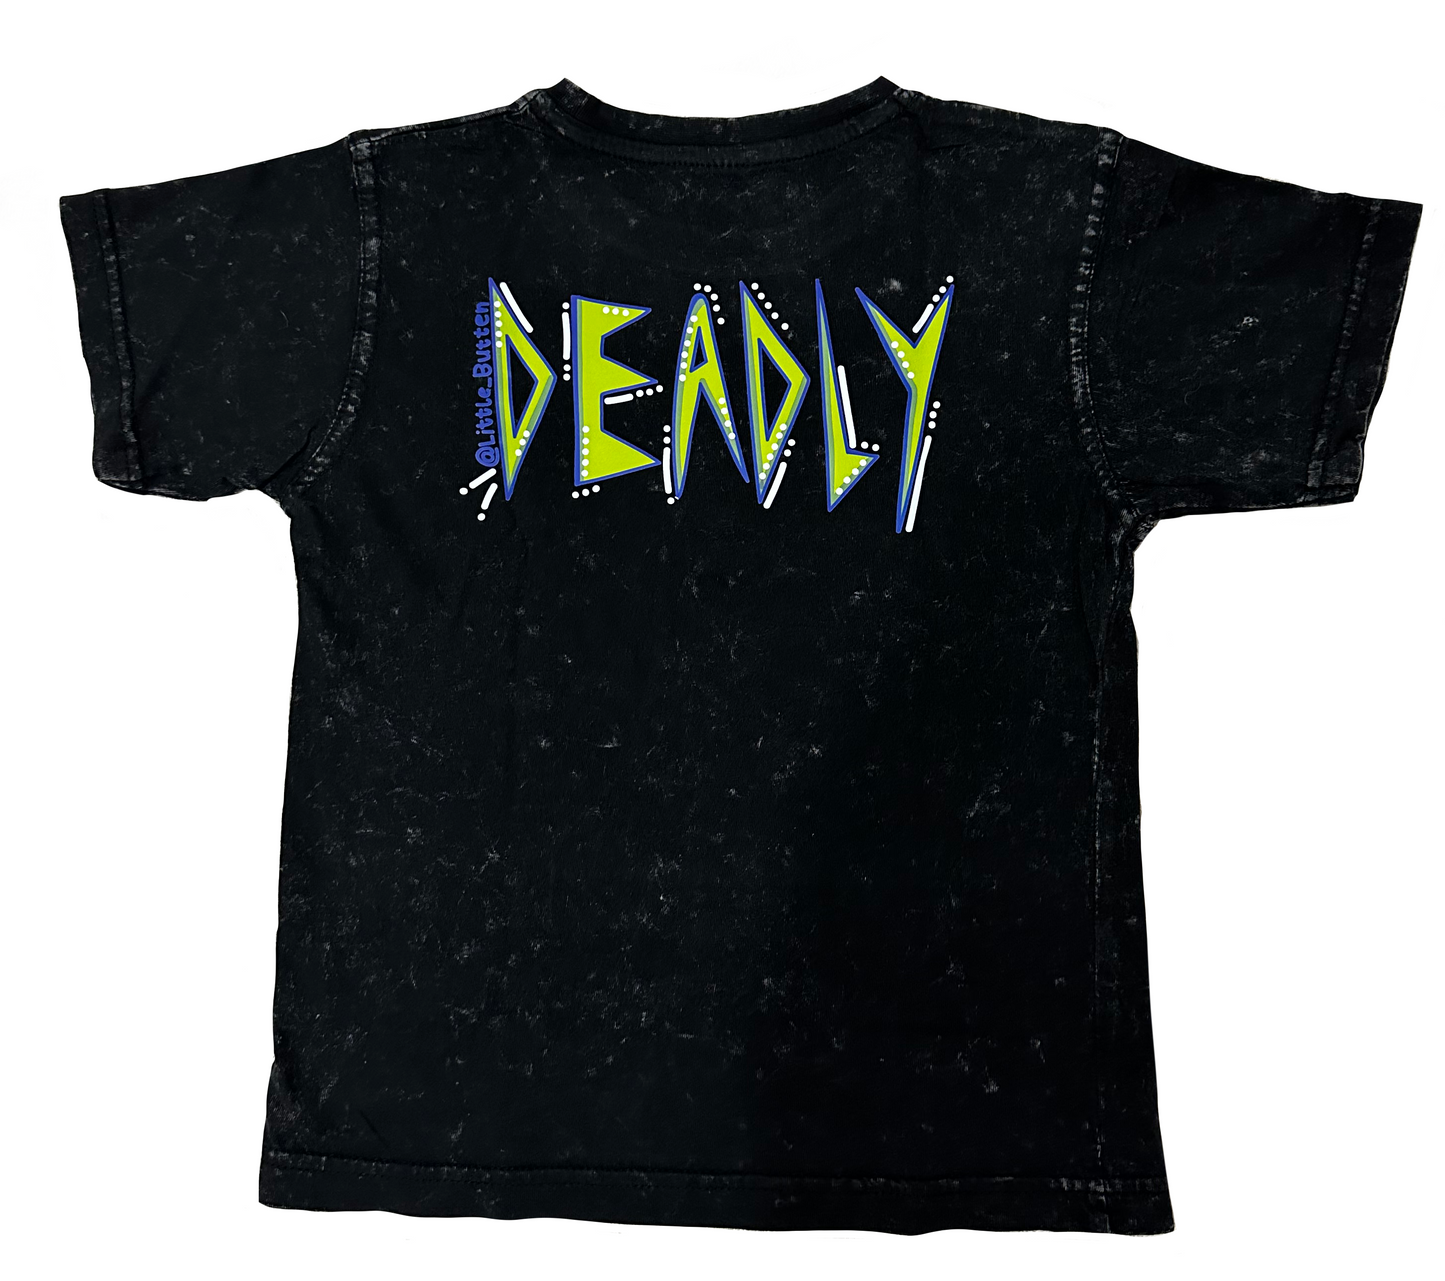 'Deadly Funky Snake' Stone Wash Adult Shirt